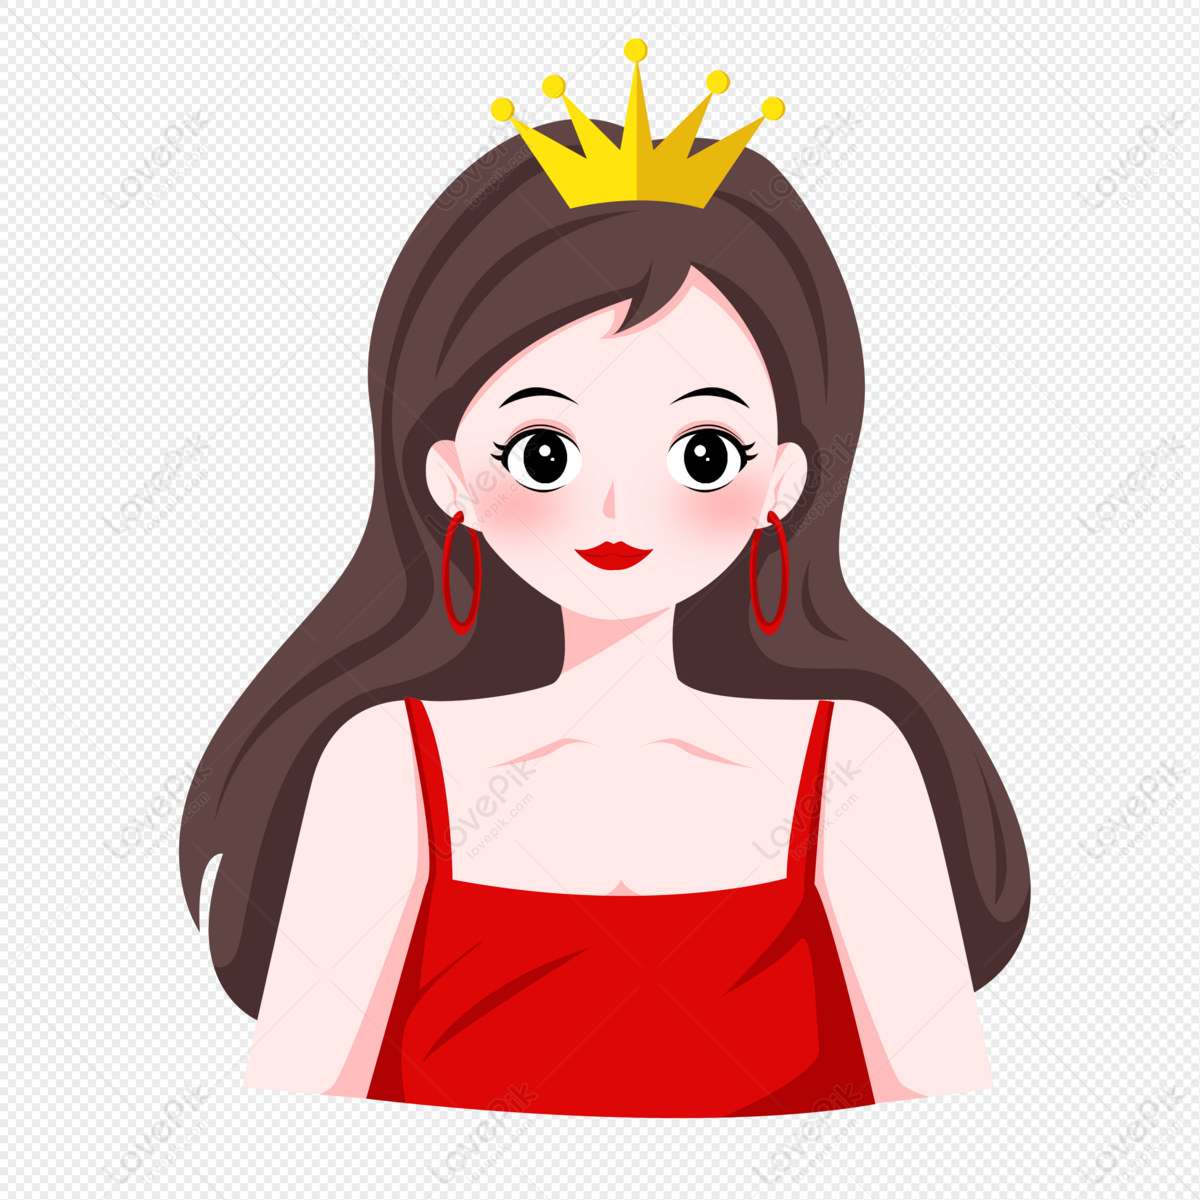 Cute Drawing Cartoon Girl For Profile Picture Vector, Girl, Cartoon Girl,  Girl Portrait PNG and Vector with Transparent Background for Free Download